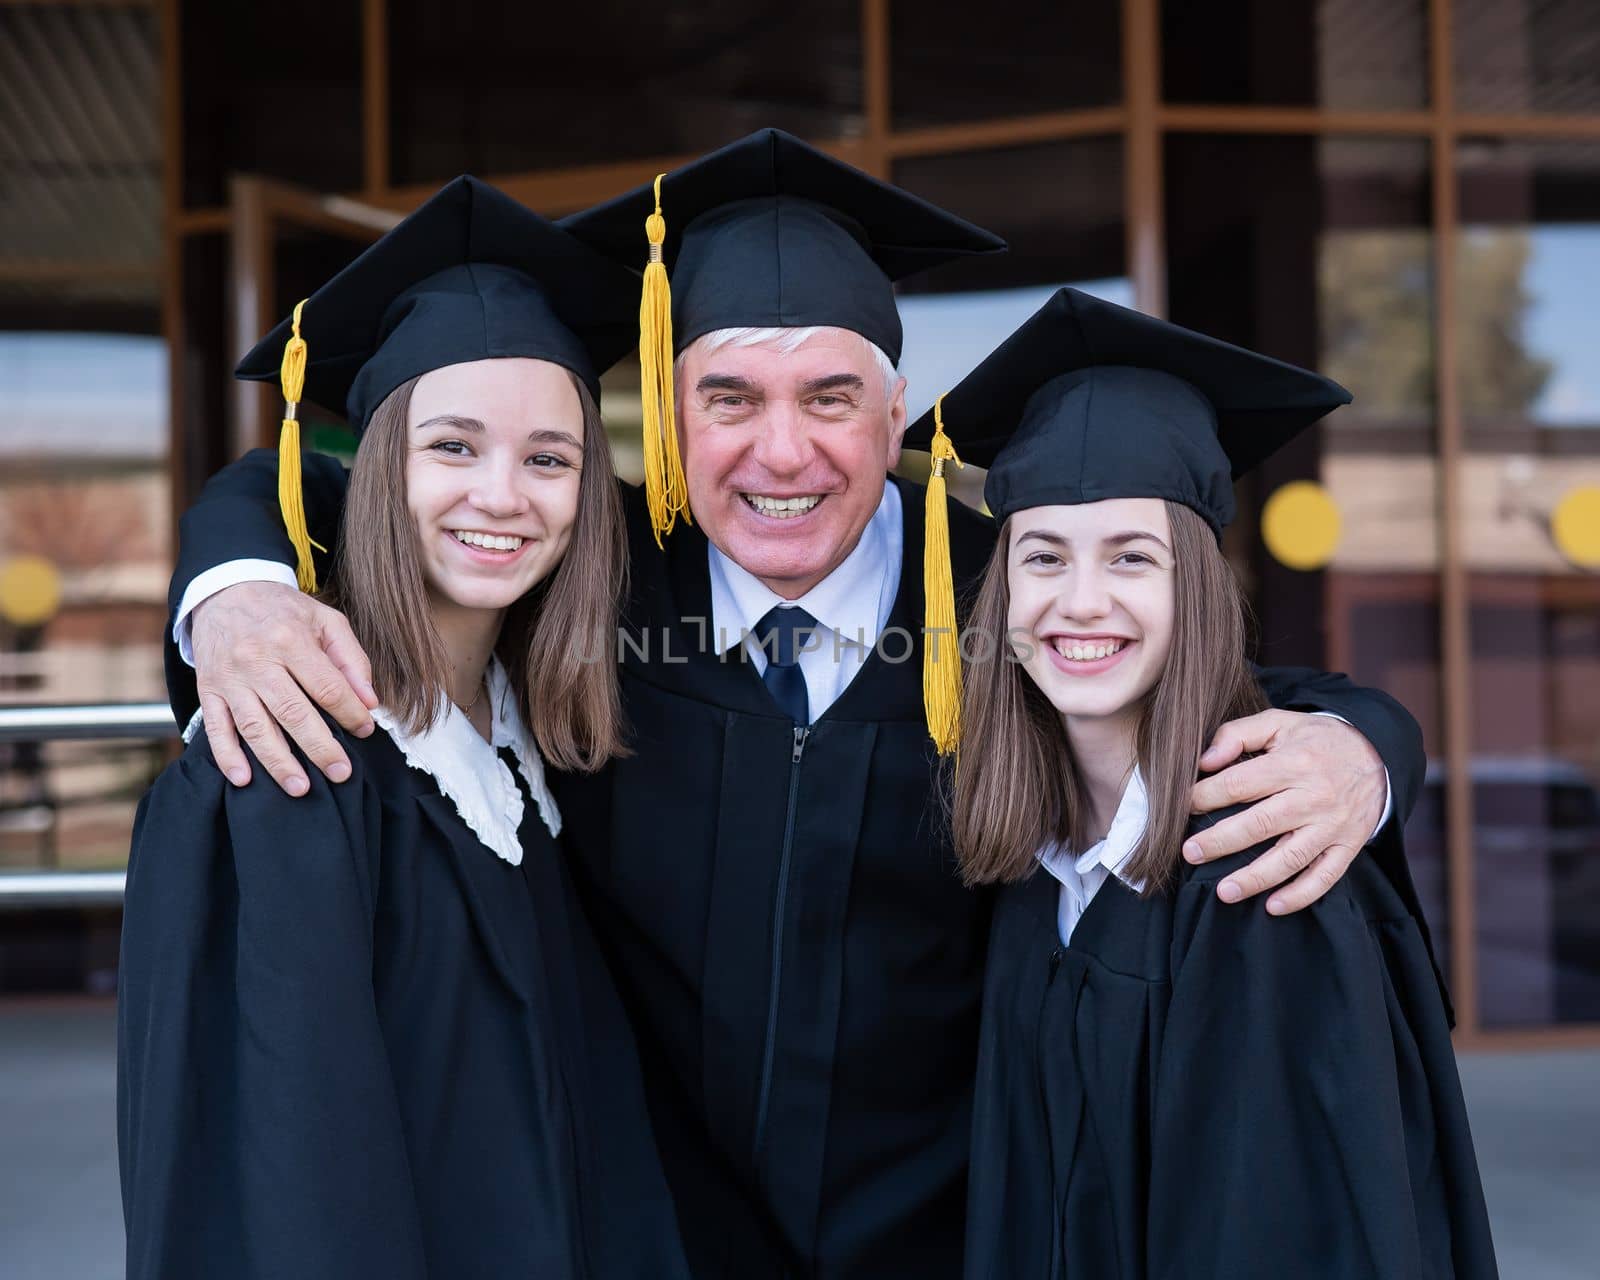 An elderly man hugs young girls. Classmates in graduation gowns. by mrwed54